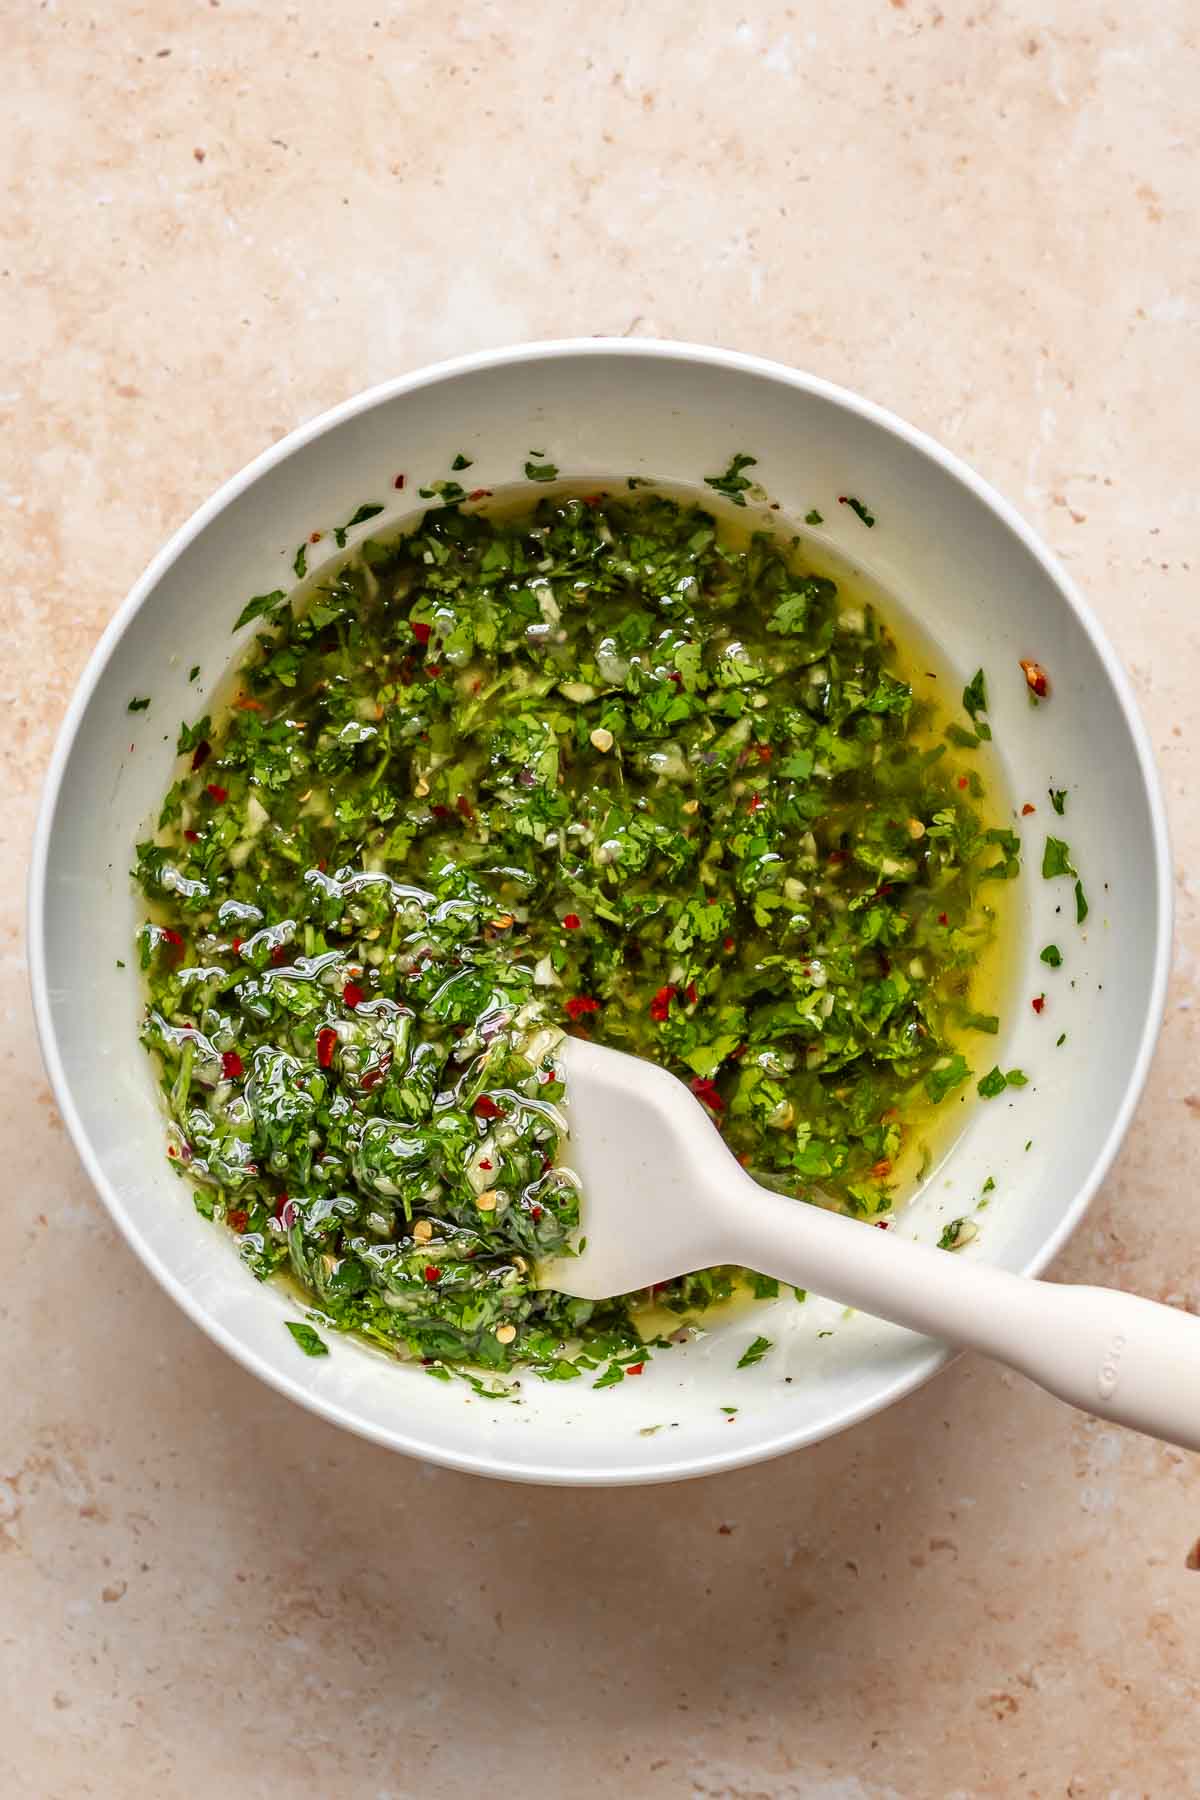 Chimichurri in a bowl with a spatula.